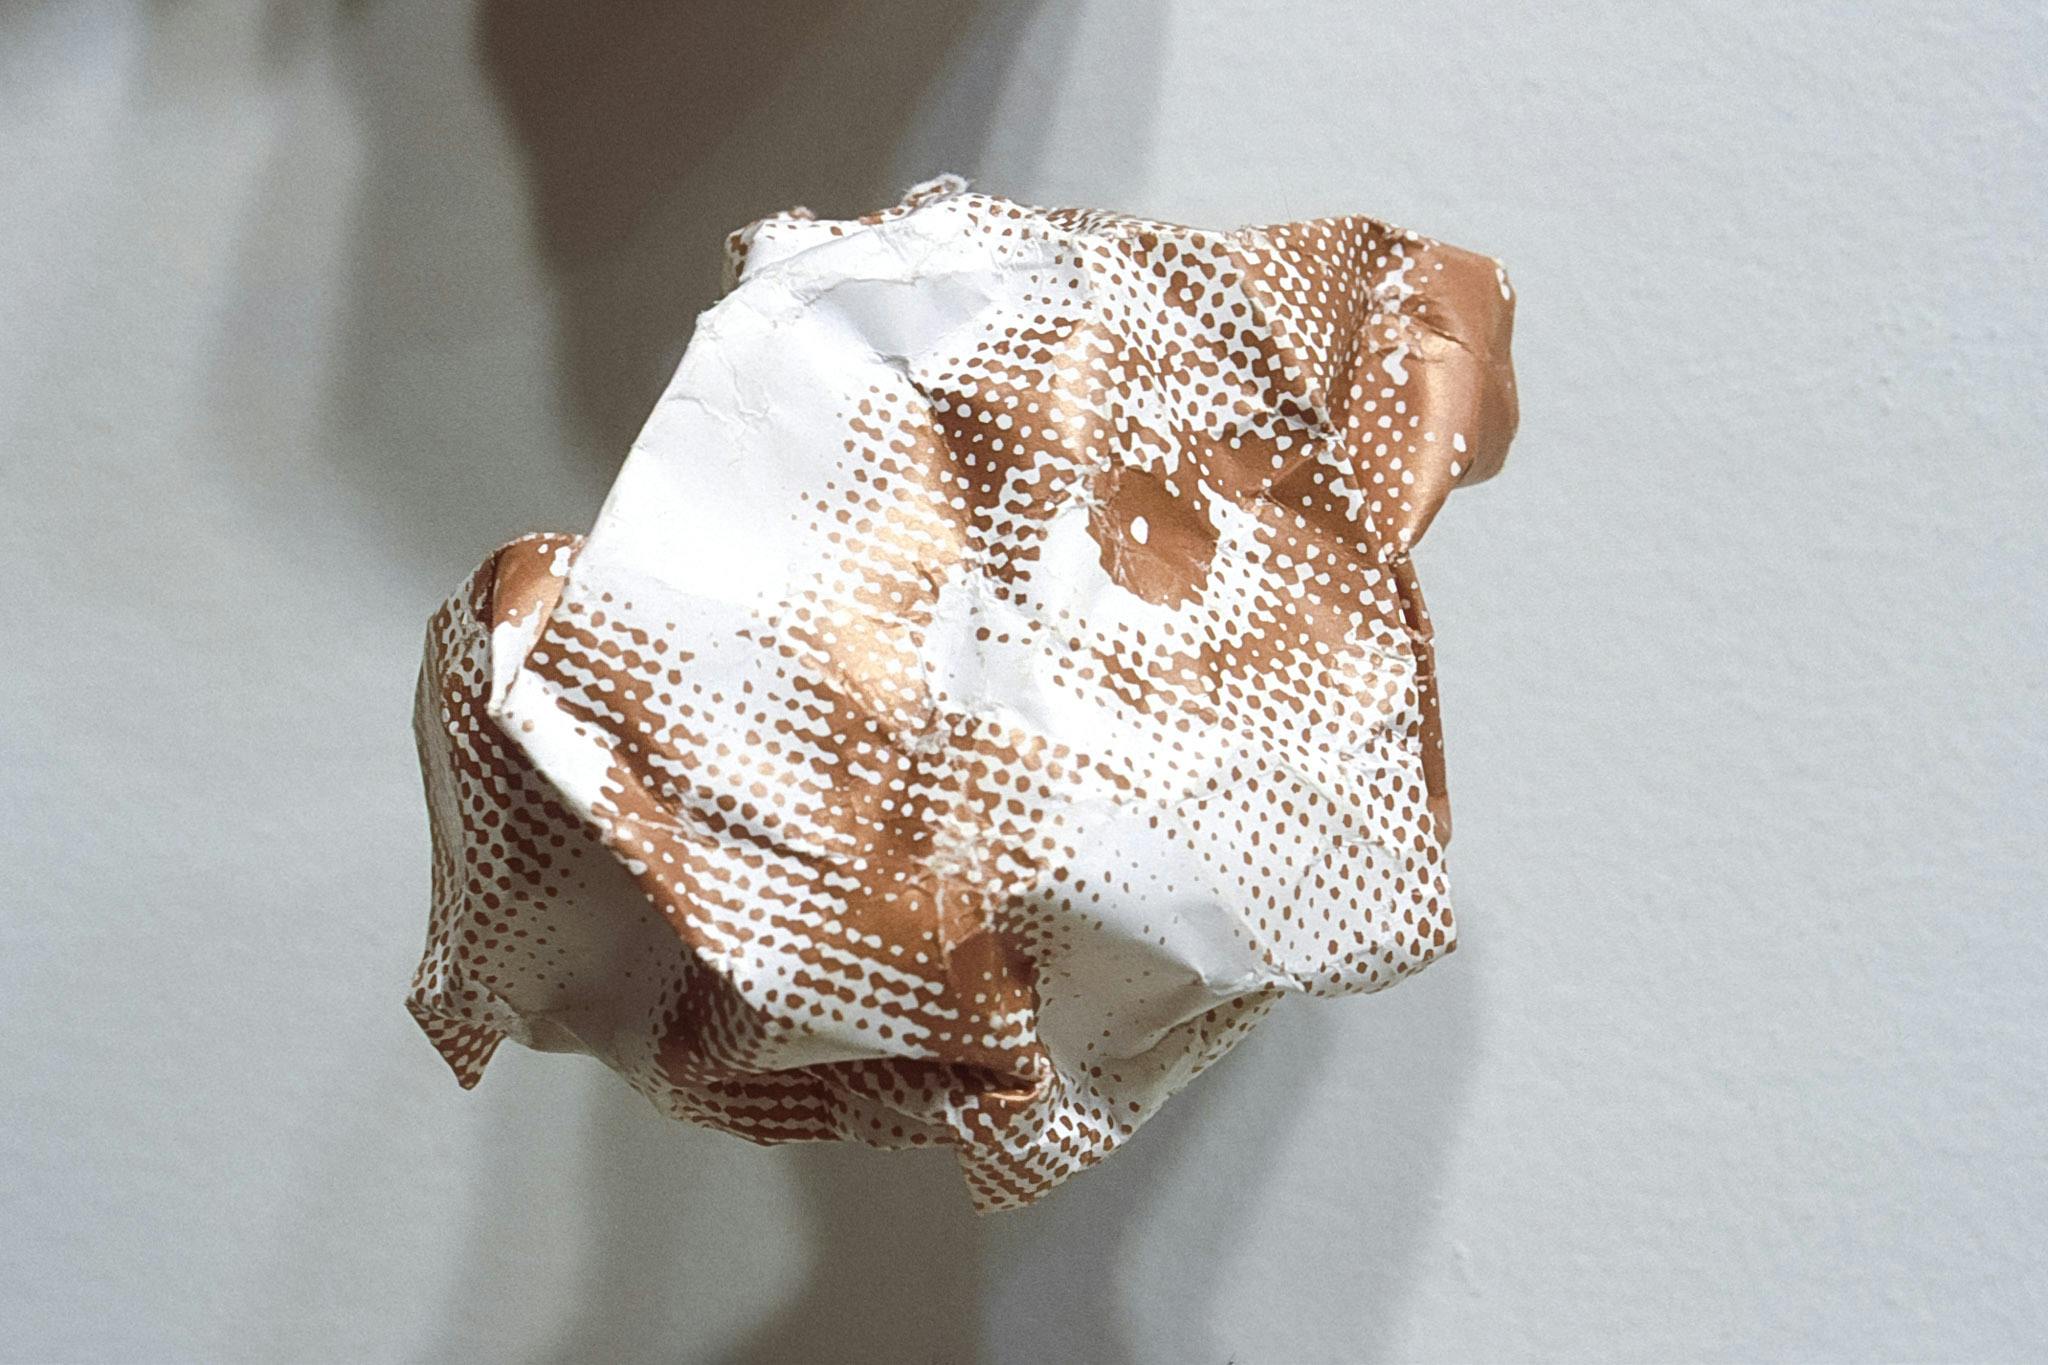 A face, printed in white and orange-brown, is roughly folded into a shape of a ball. This folded paper is installed in a gallery space. A person’s eye is the most recognizable part of this piece.